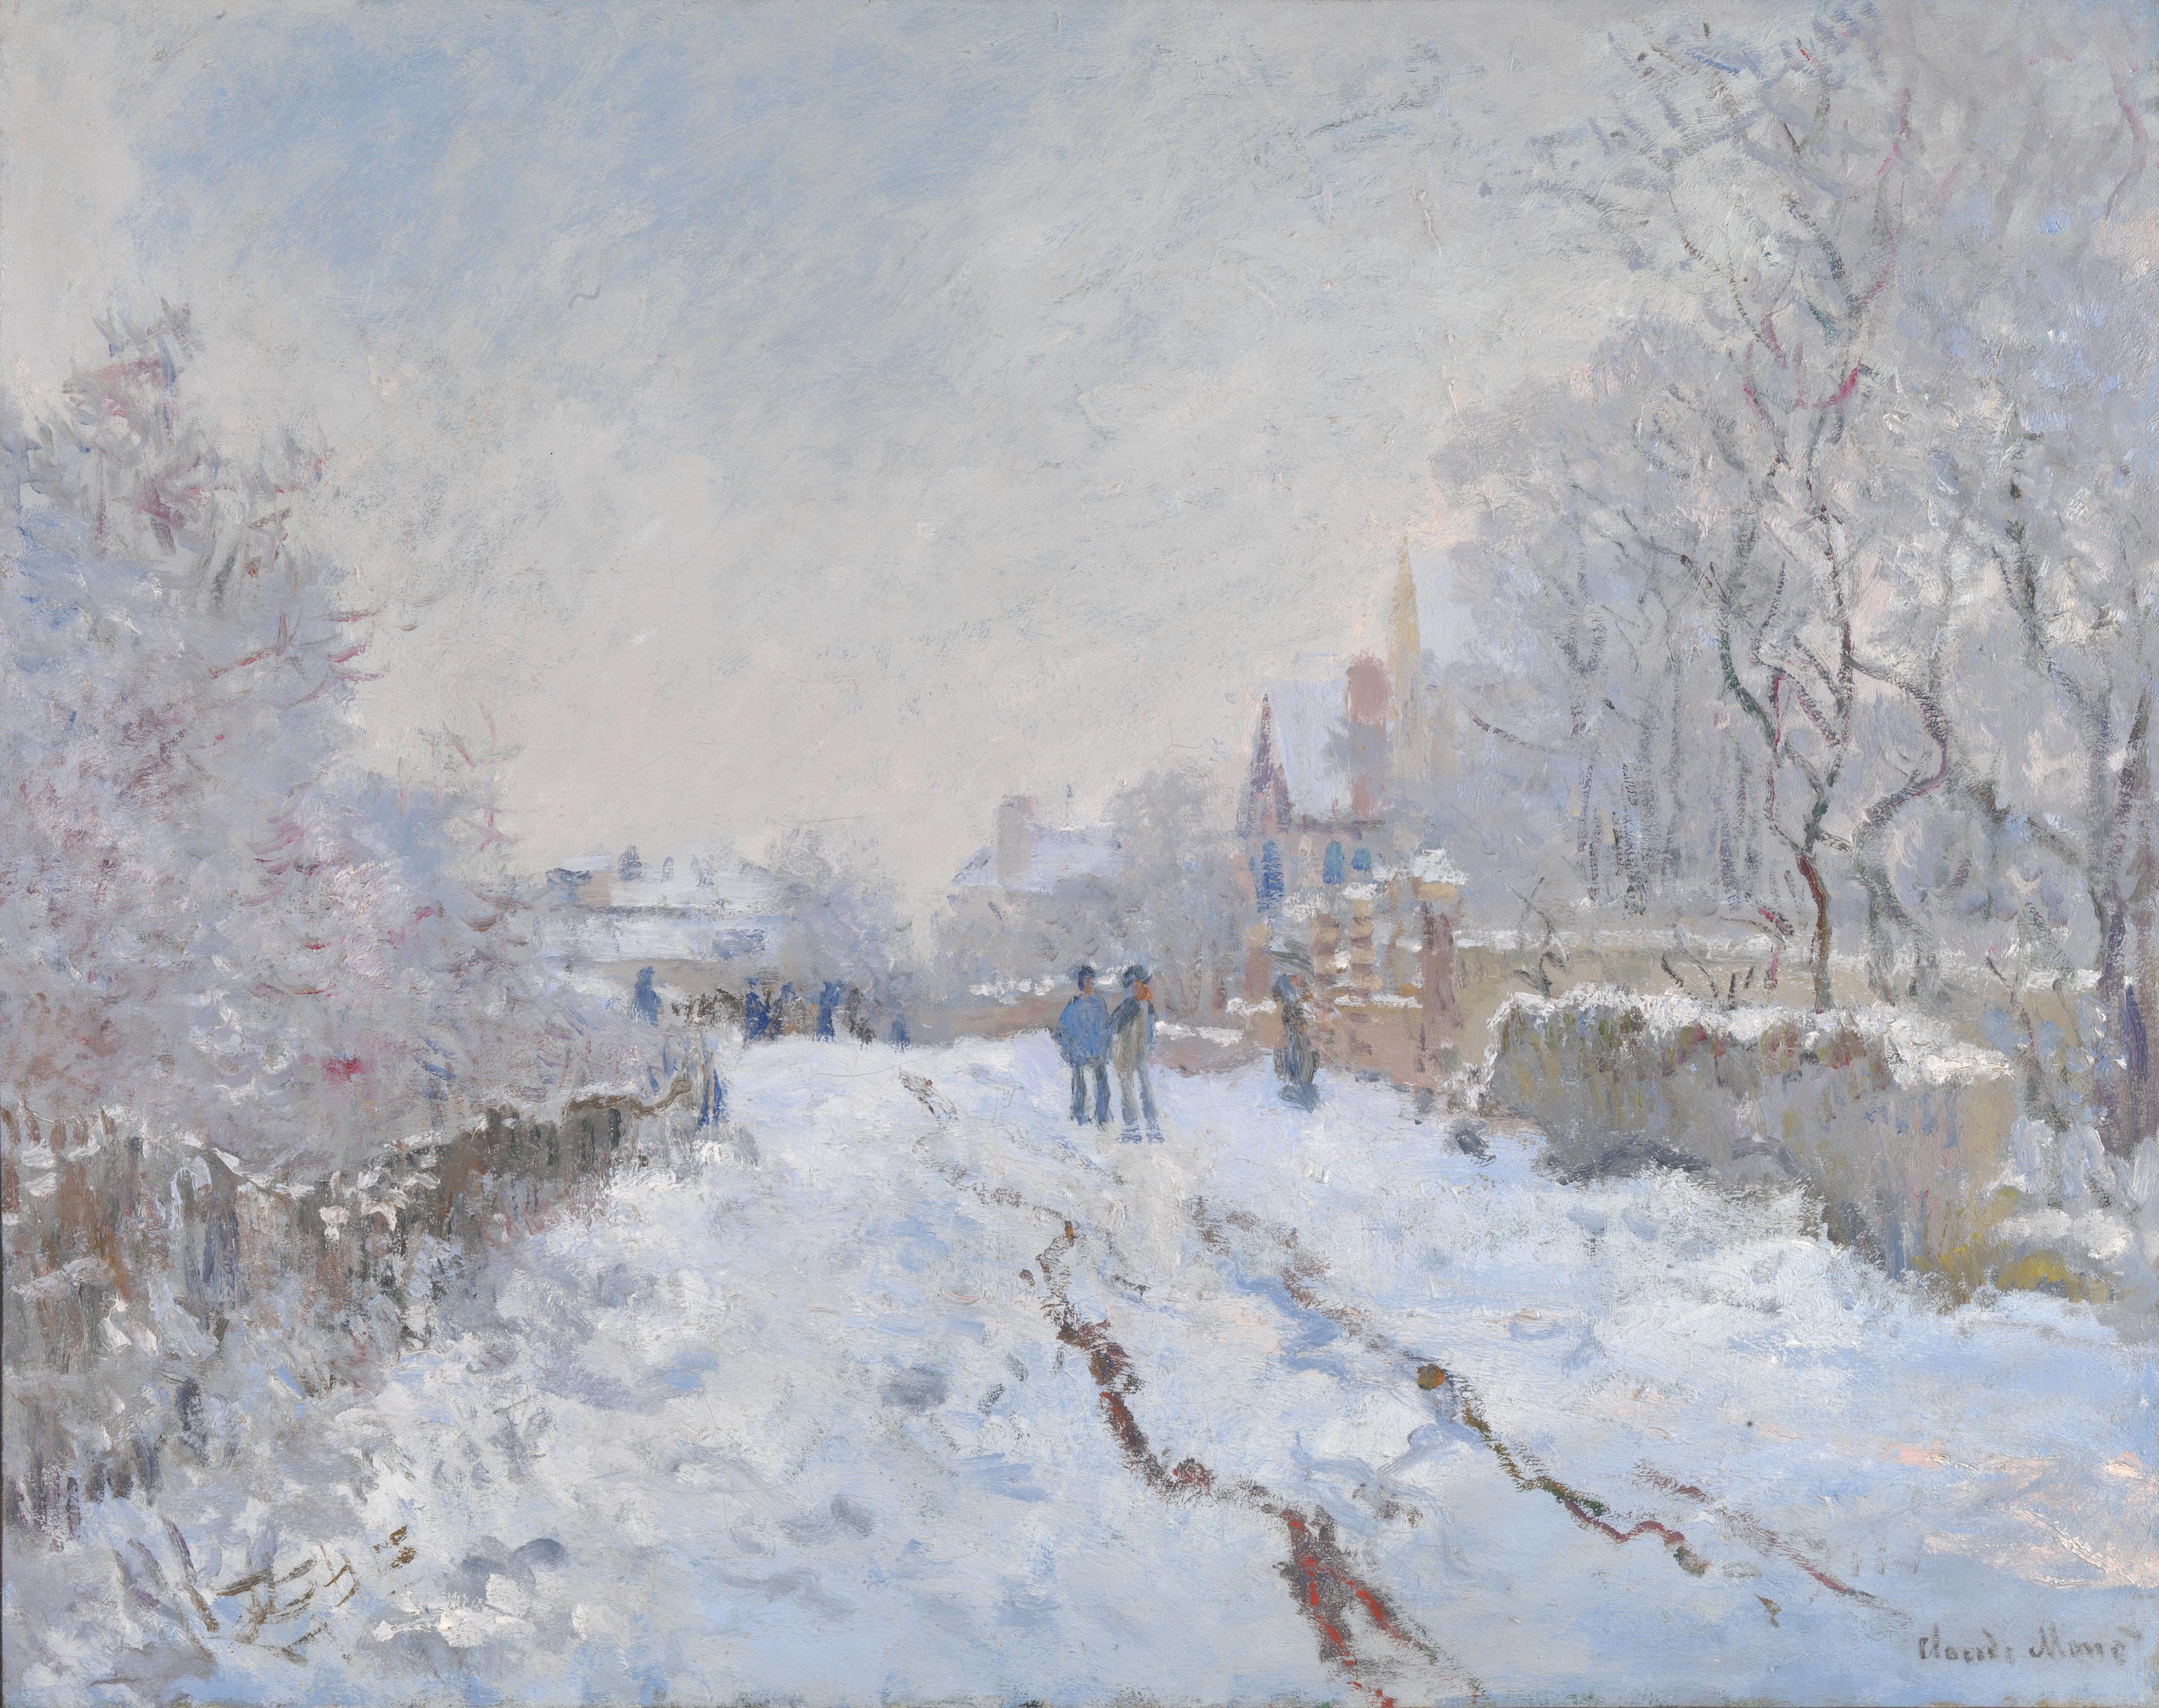 Snow Scene at Argenteuil by Claude Monet - 1875 - 71.1 x 91.4 cm National Gallery